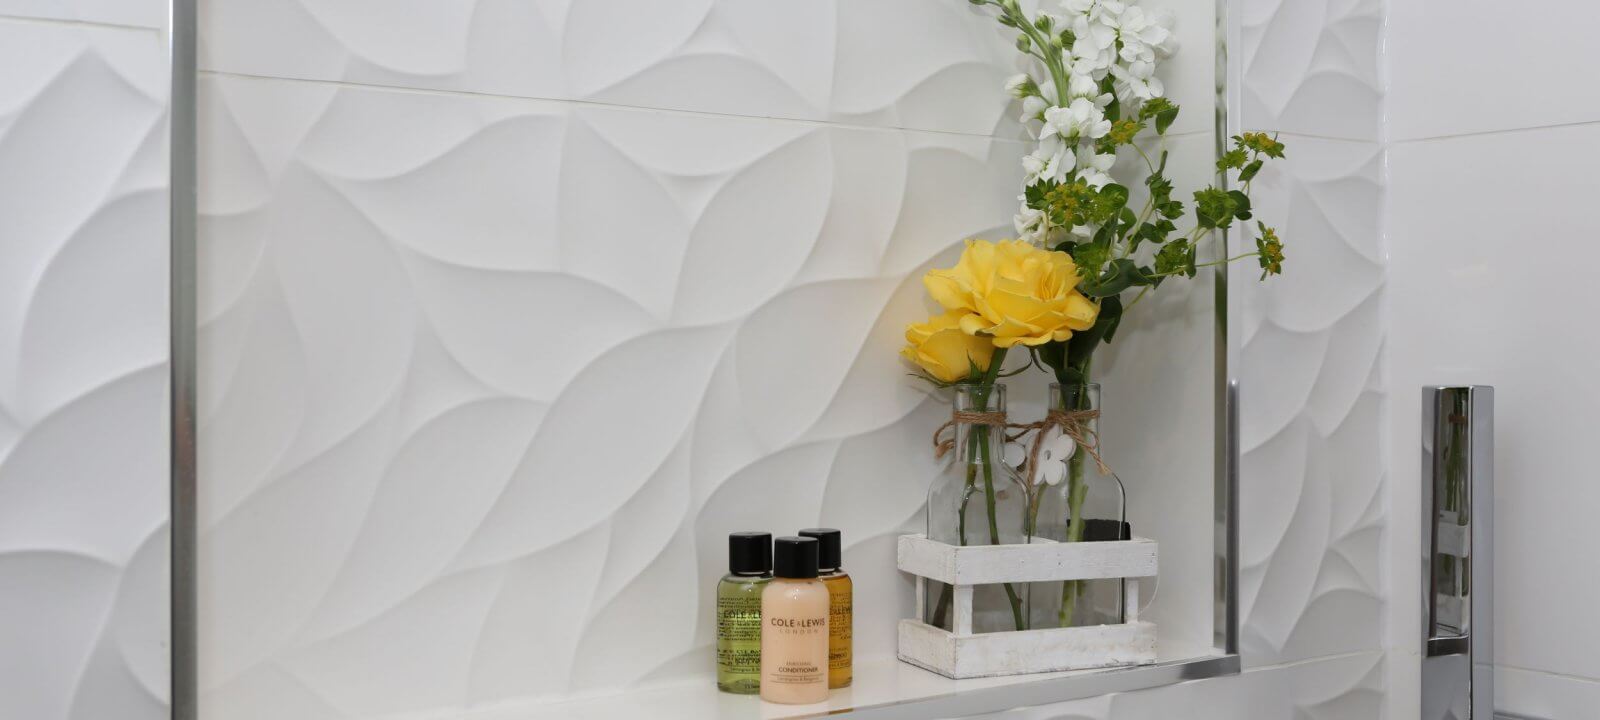 inset in bathroom wall with flower arrangement and toiletries